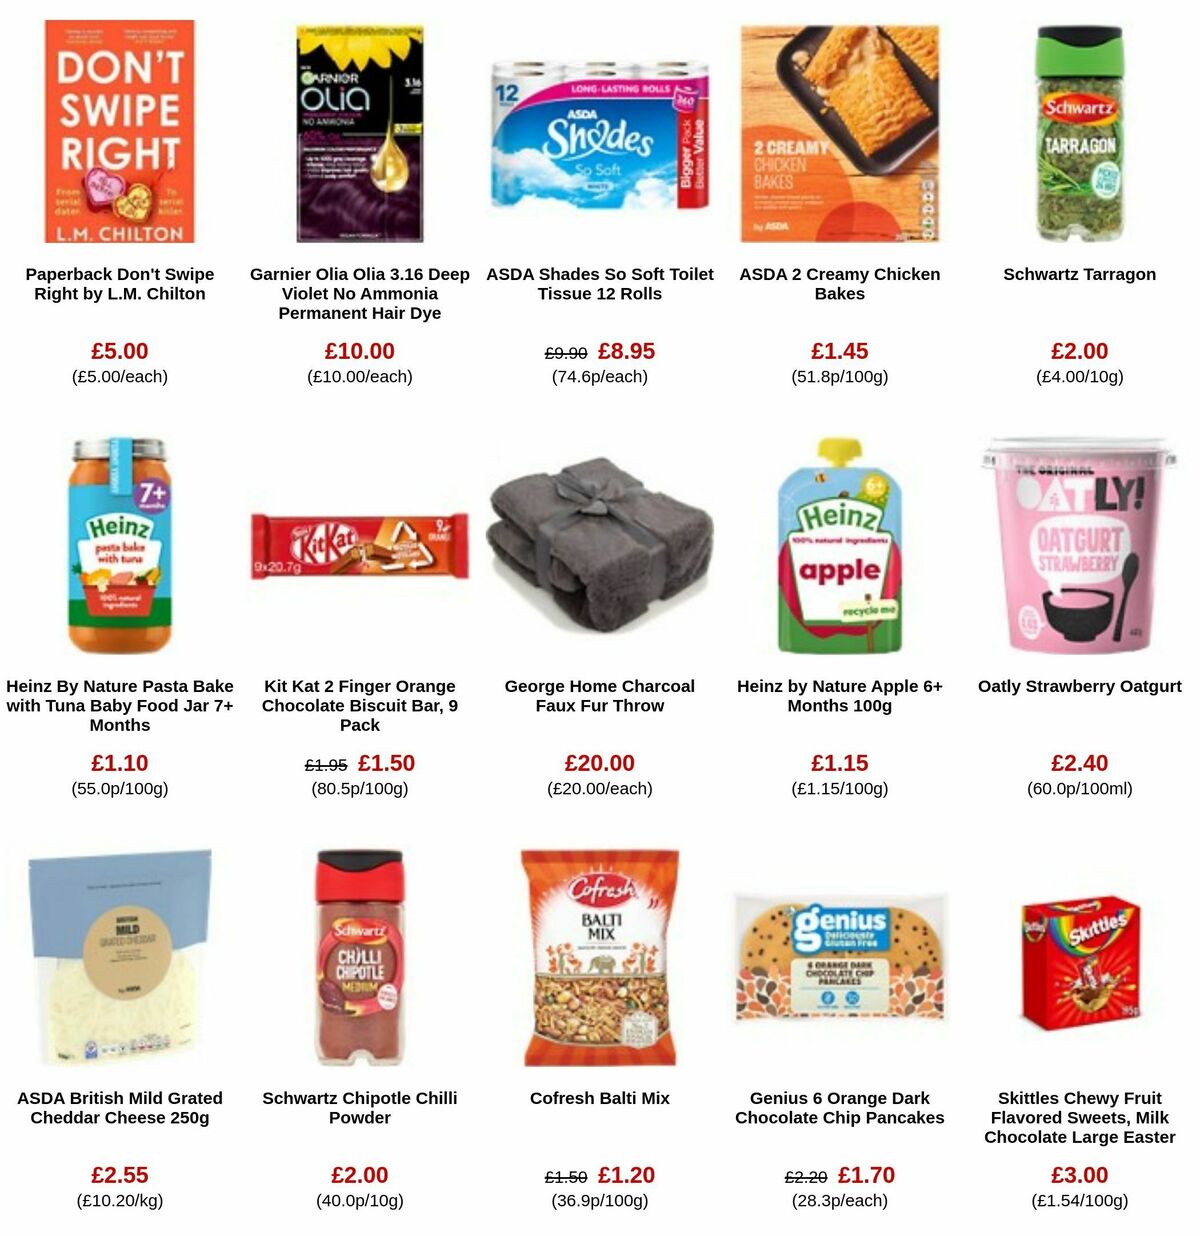 ASDA Offers from 23 February